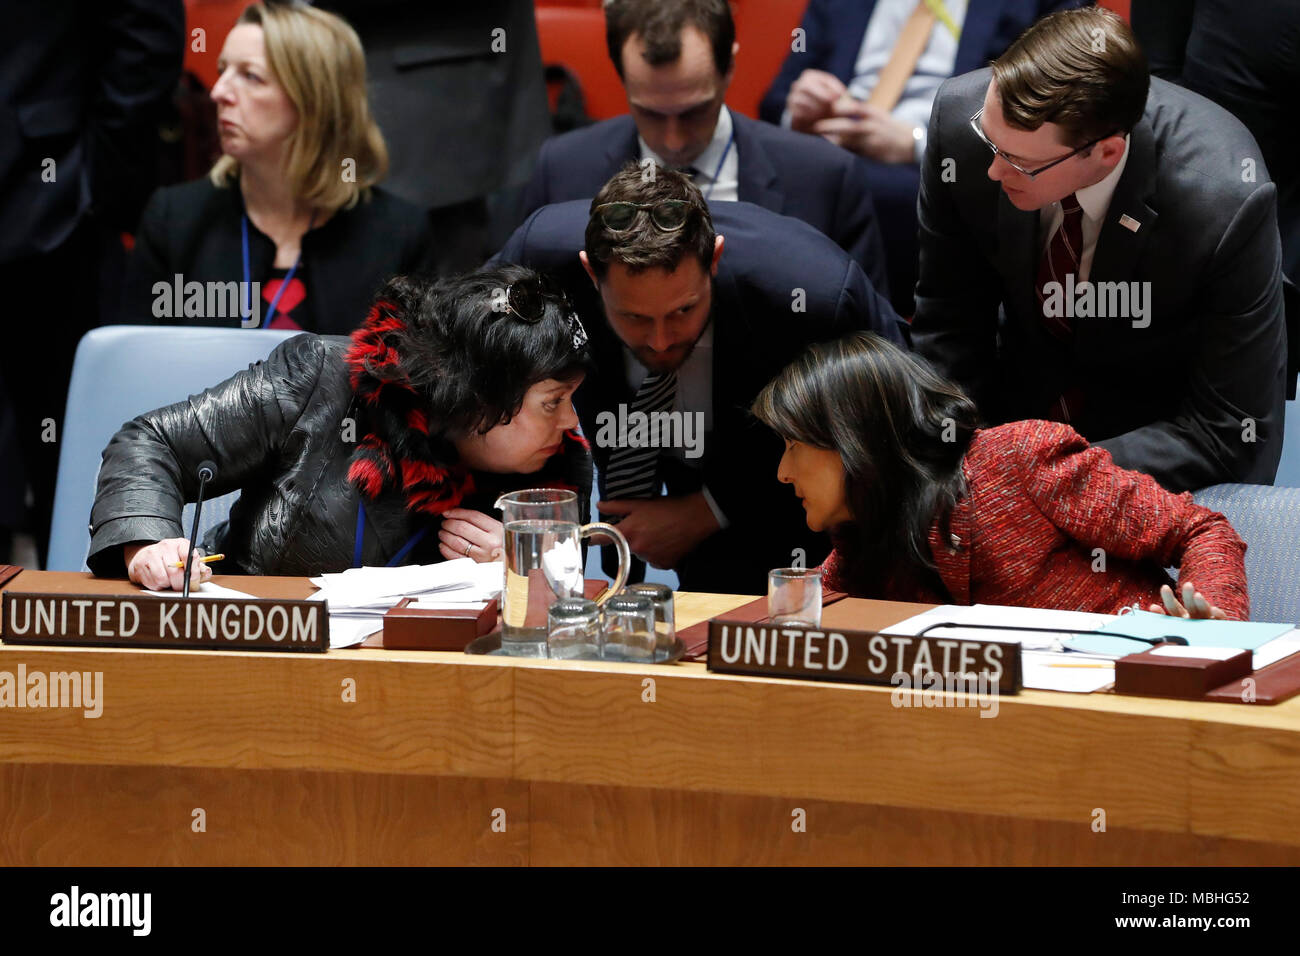 Untied Nations, UN headquarters in New York. 10th Apr, 2018. U.S. Ambassador to the United Nations Nikki Haley (R, Front) talks with British Ambassador to the UN Karen Pierce (L, Front) prior to a Security Council voting on a Russian-drafted resolution on an investigation by the Organization for the Prohibition of Chemical Weapons (OPCW) into the alleged chemical attack in Douma, Syria, at the UN headquarters in New York, on April 10, 2018. The UN Security Council failed to adopt the Russian-drafted resolution on Tuesday. Credit: Li Muzi/Xinhua/Alamy Live News Stock Photo